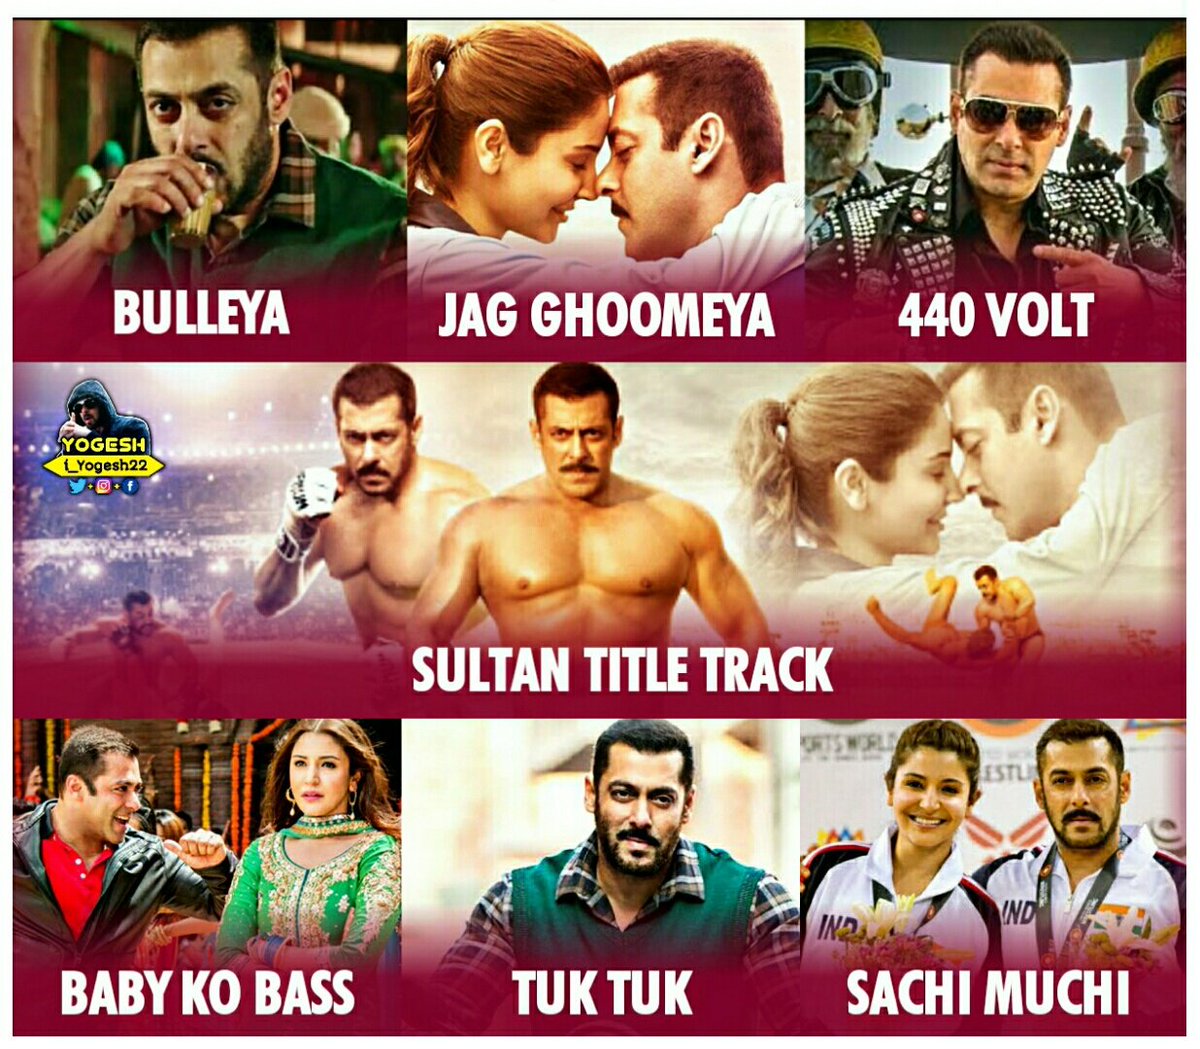  #4YearsOfSultanFilm's Music Album With 7 Songs & The BGM Was LEGENDARY! The Best!Easily One of The Best Albums of All Time, With Bulleya & 440 Volt Being My Favourite Songs!2016's BIGGEST CHARTBUSTER ALBUM, 2nd Besf Music Album of Last Decade After Bajrangi Bhaijaan(3/12)